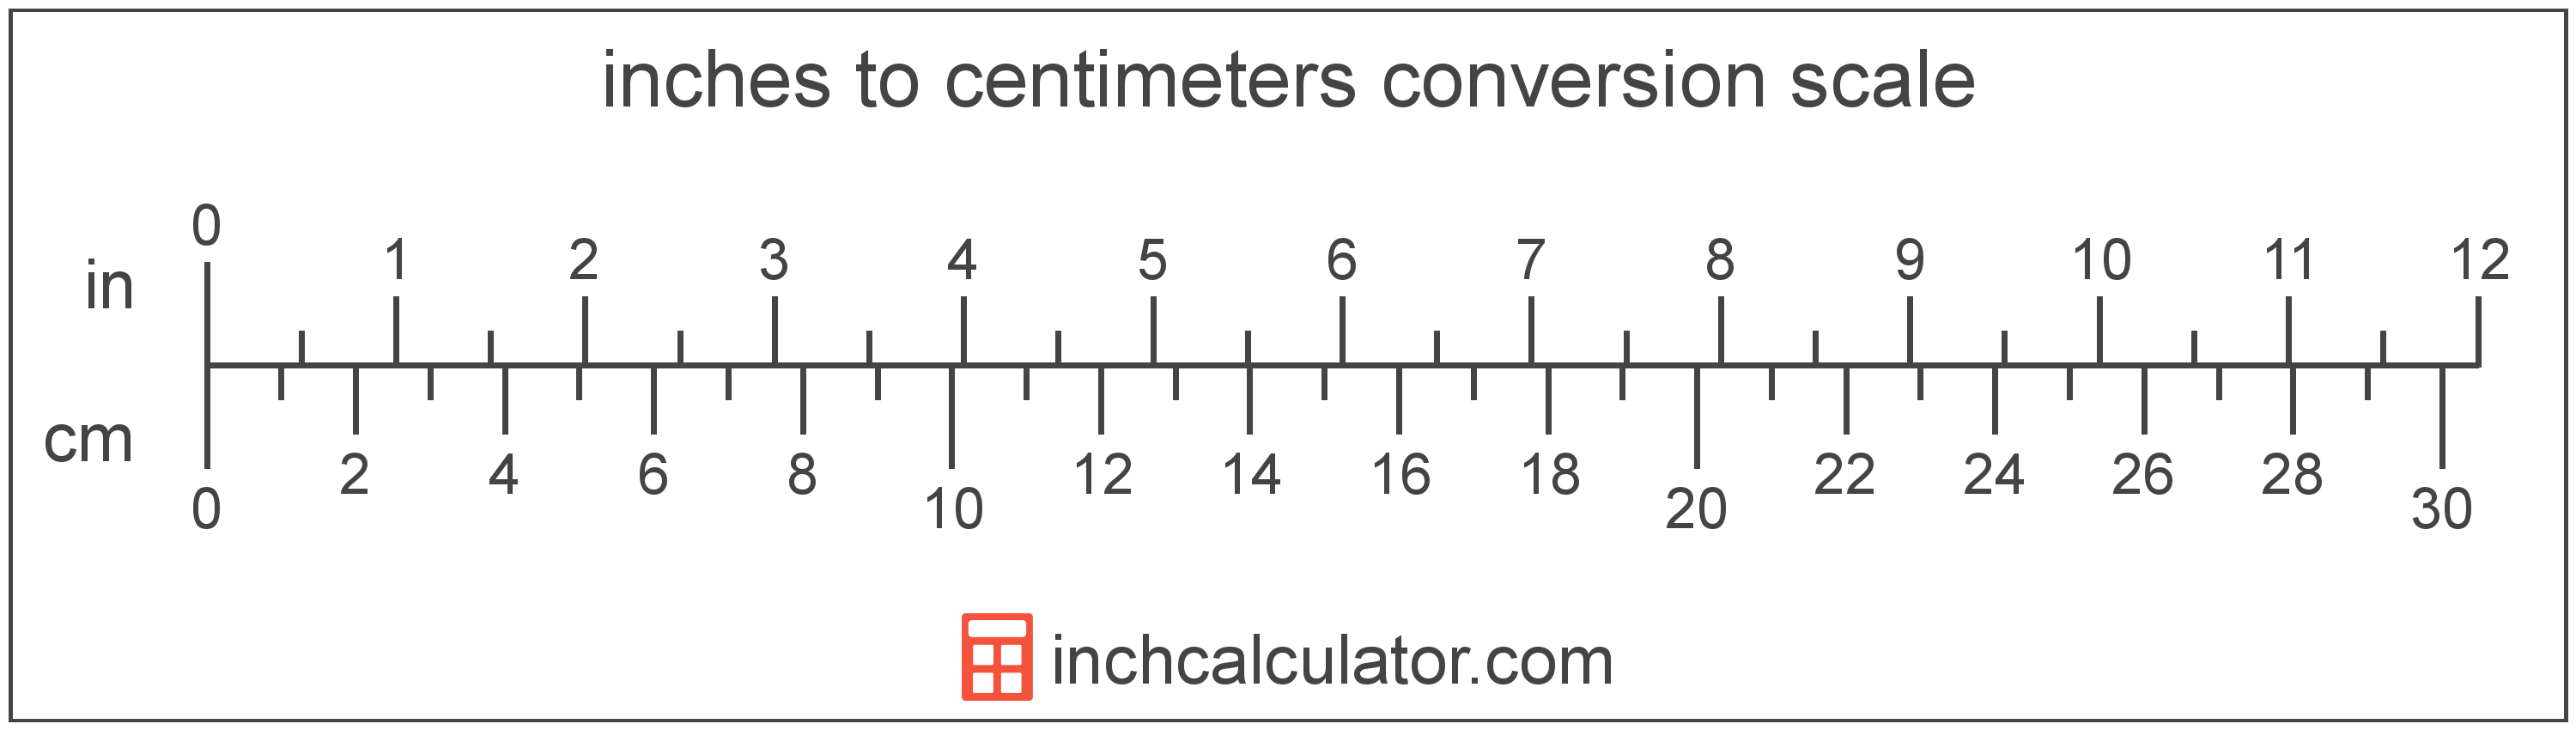 conversion scale showing inches and equivalent centimeters length values